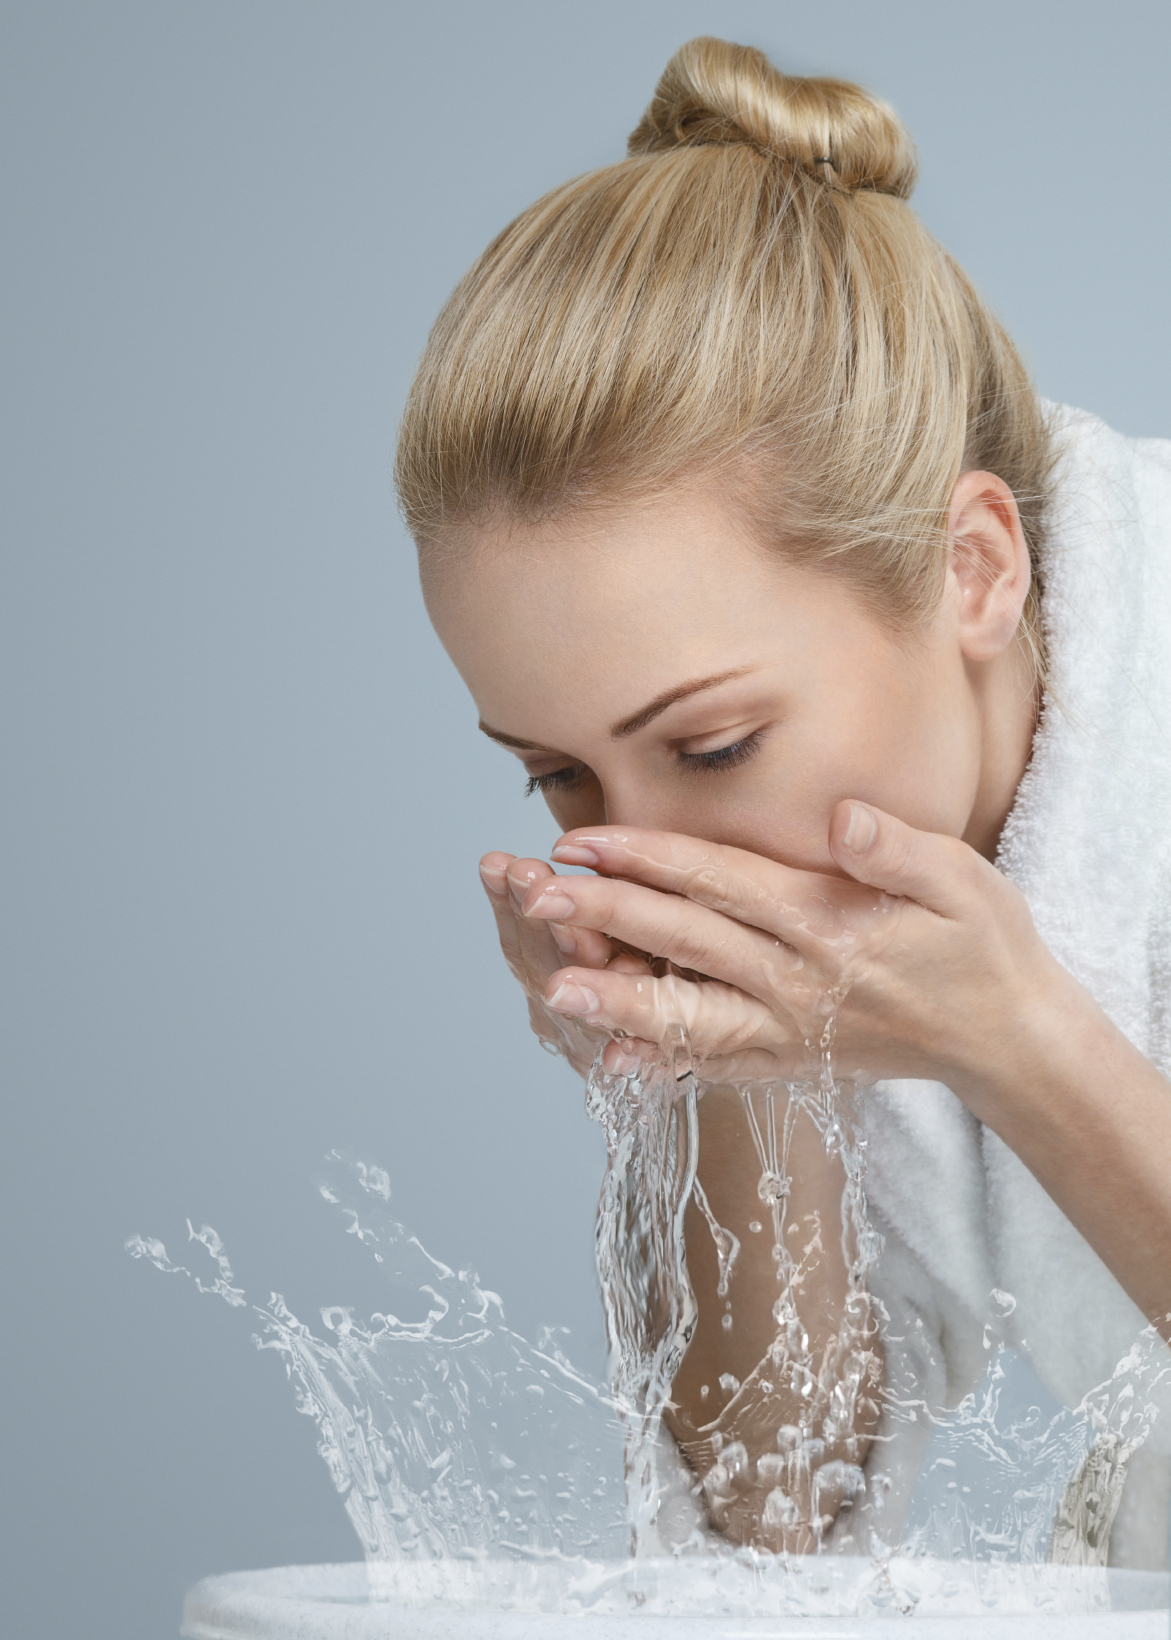 how to wash your face properly